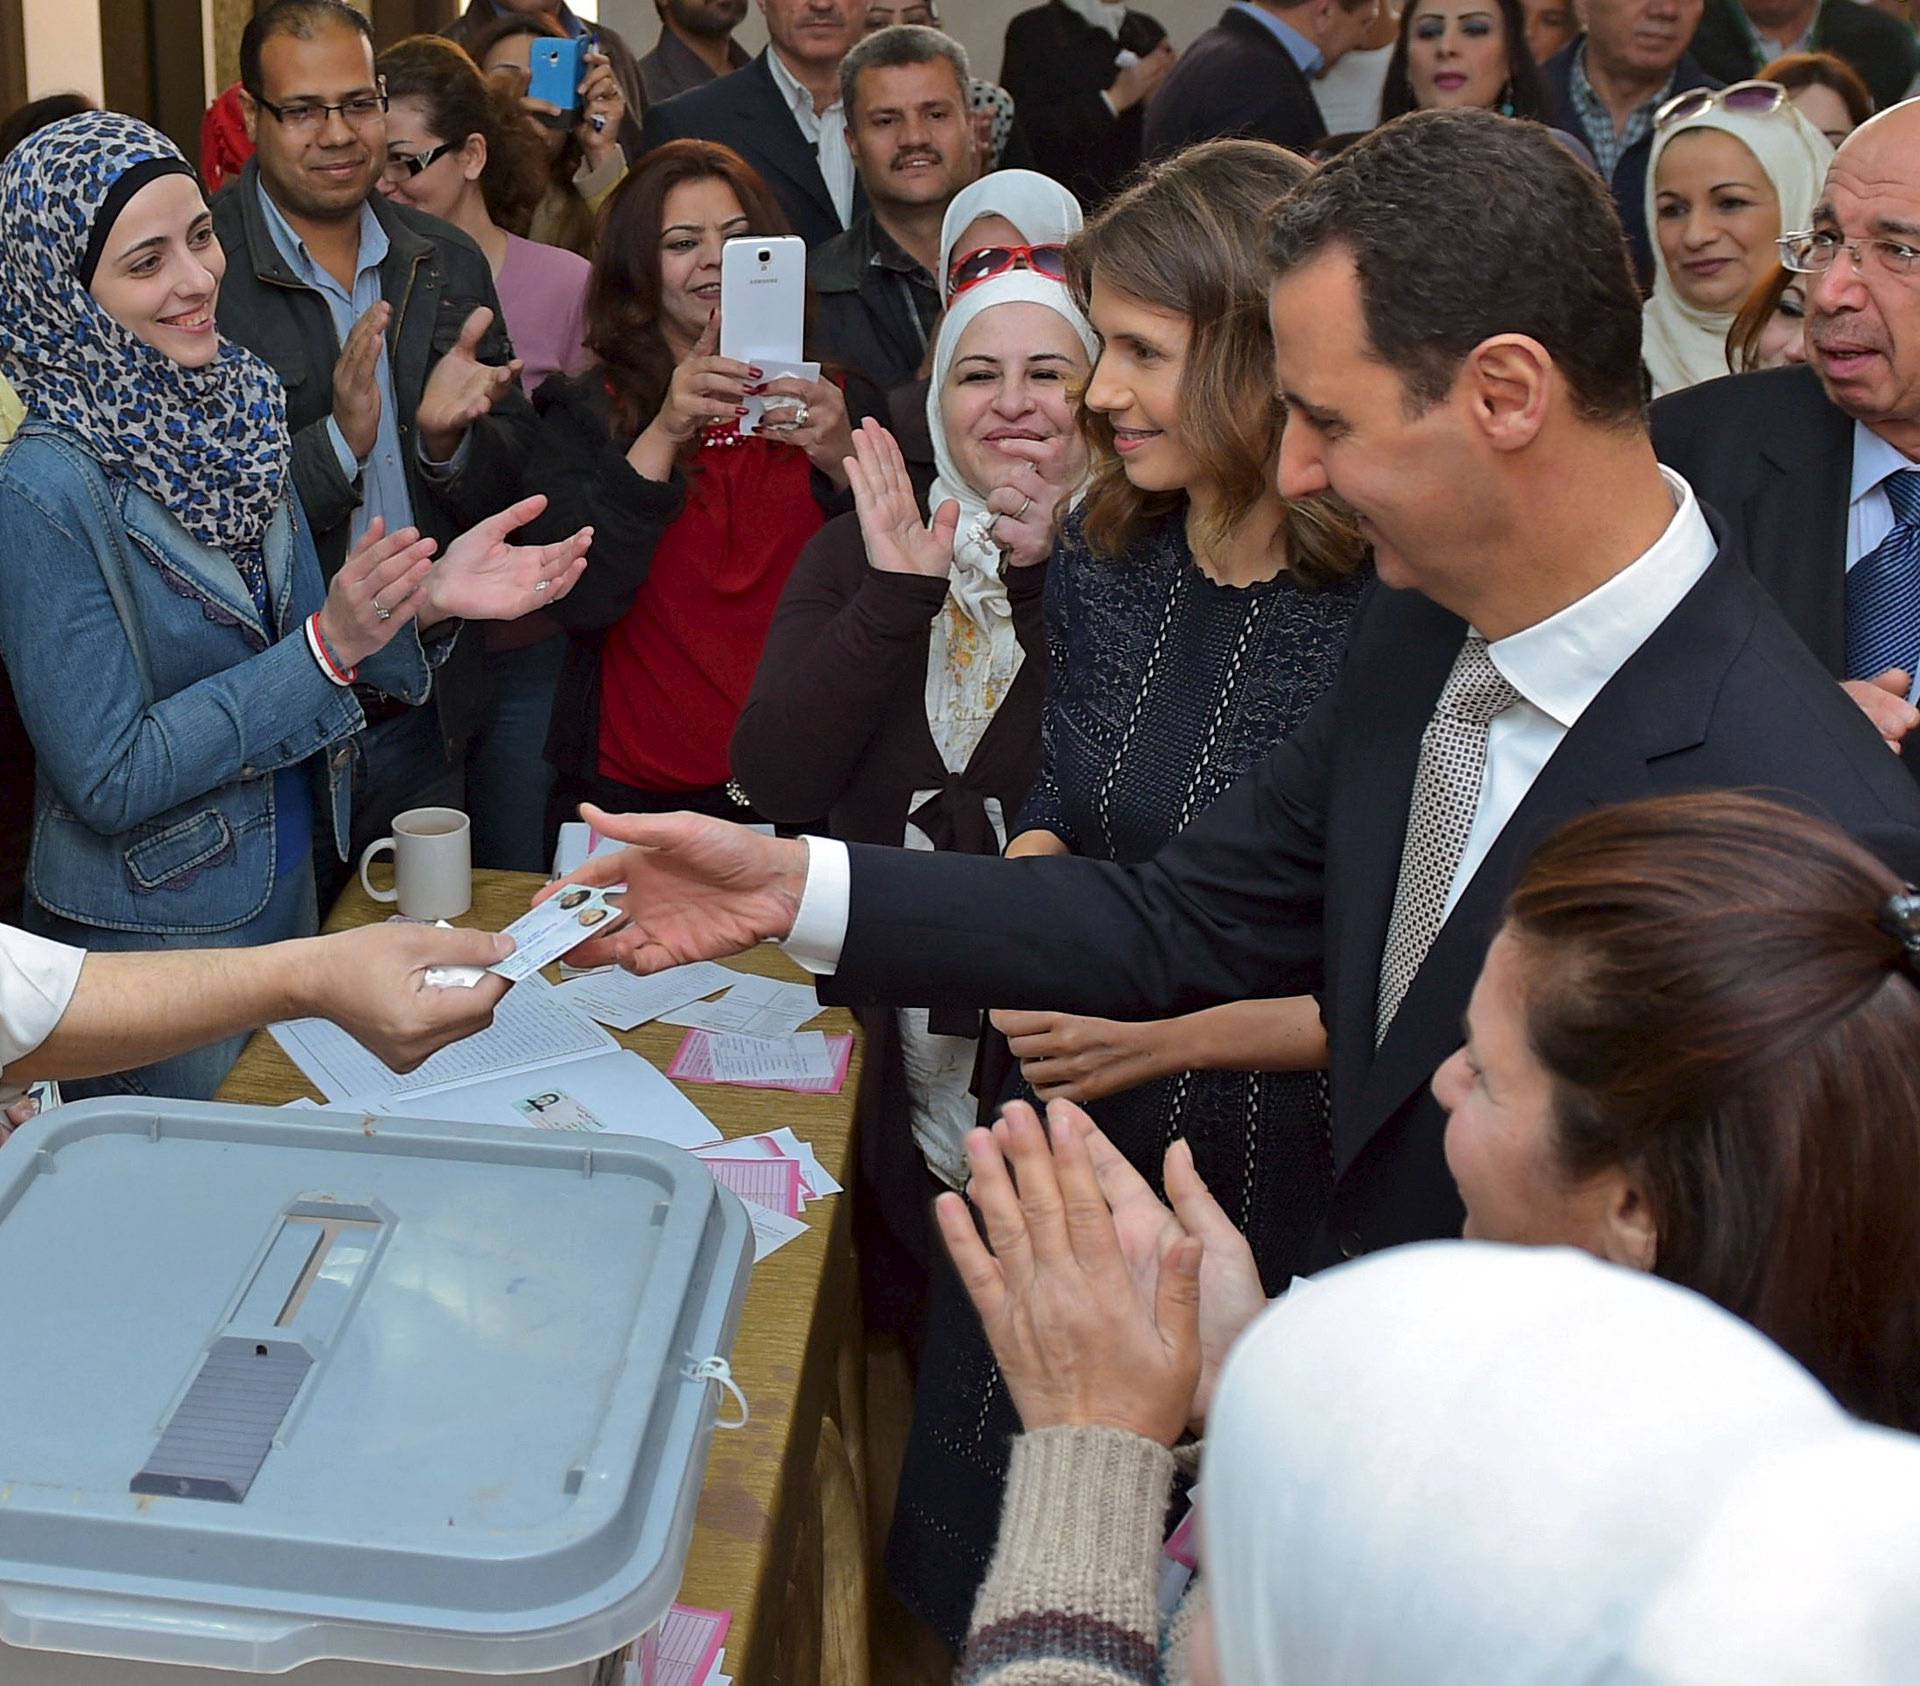 Syria's President Bashar al-Assad receives his Identification card next to his wife Asma after casting their votes, inside a polling station during parliamentary elections in Damascus